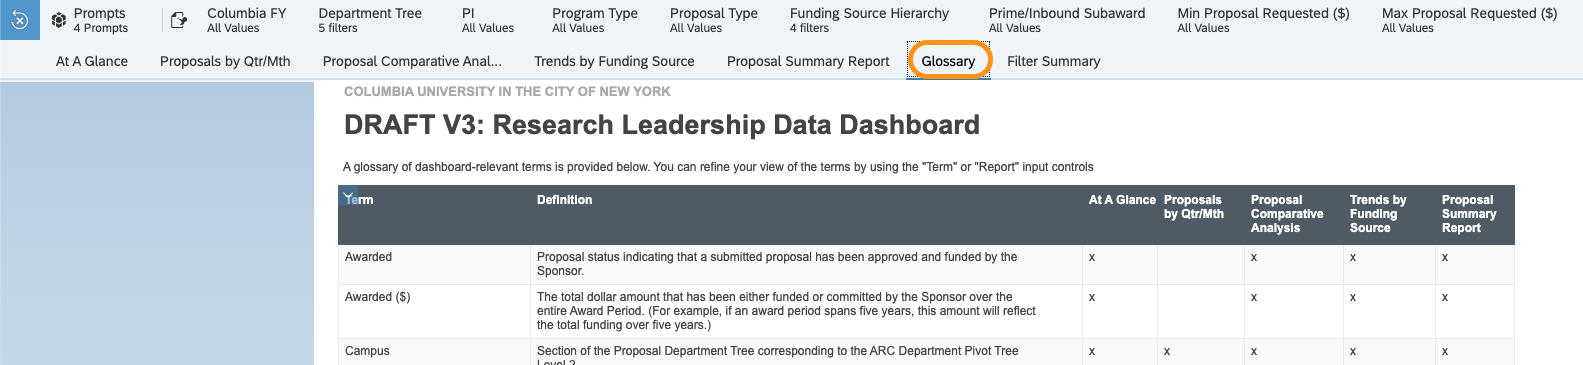 View of the top of the research leadership data dashboard, showing the navigation toolbars with the Glossary tab circled, located between the Proposal Summary Report and the Filter Summary.